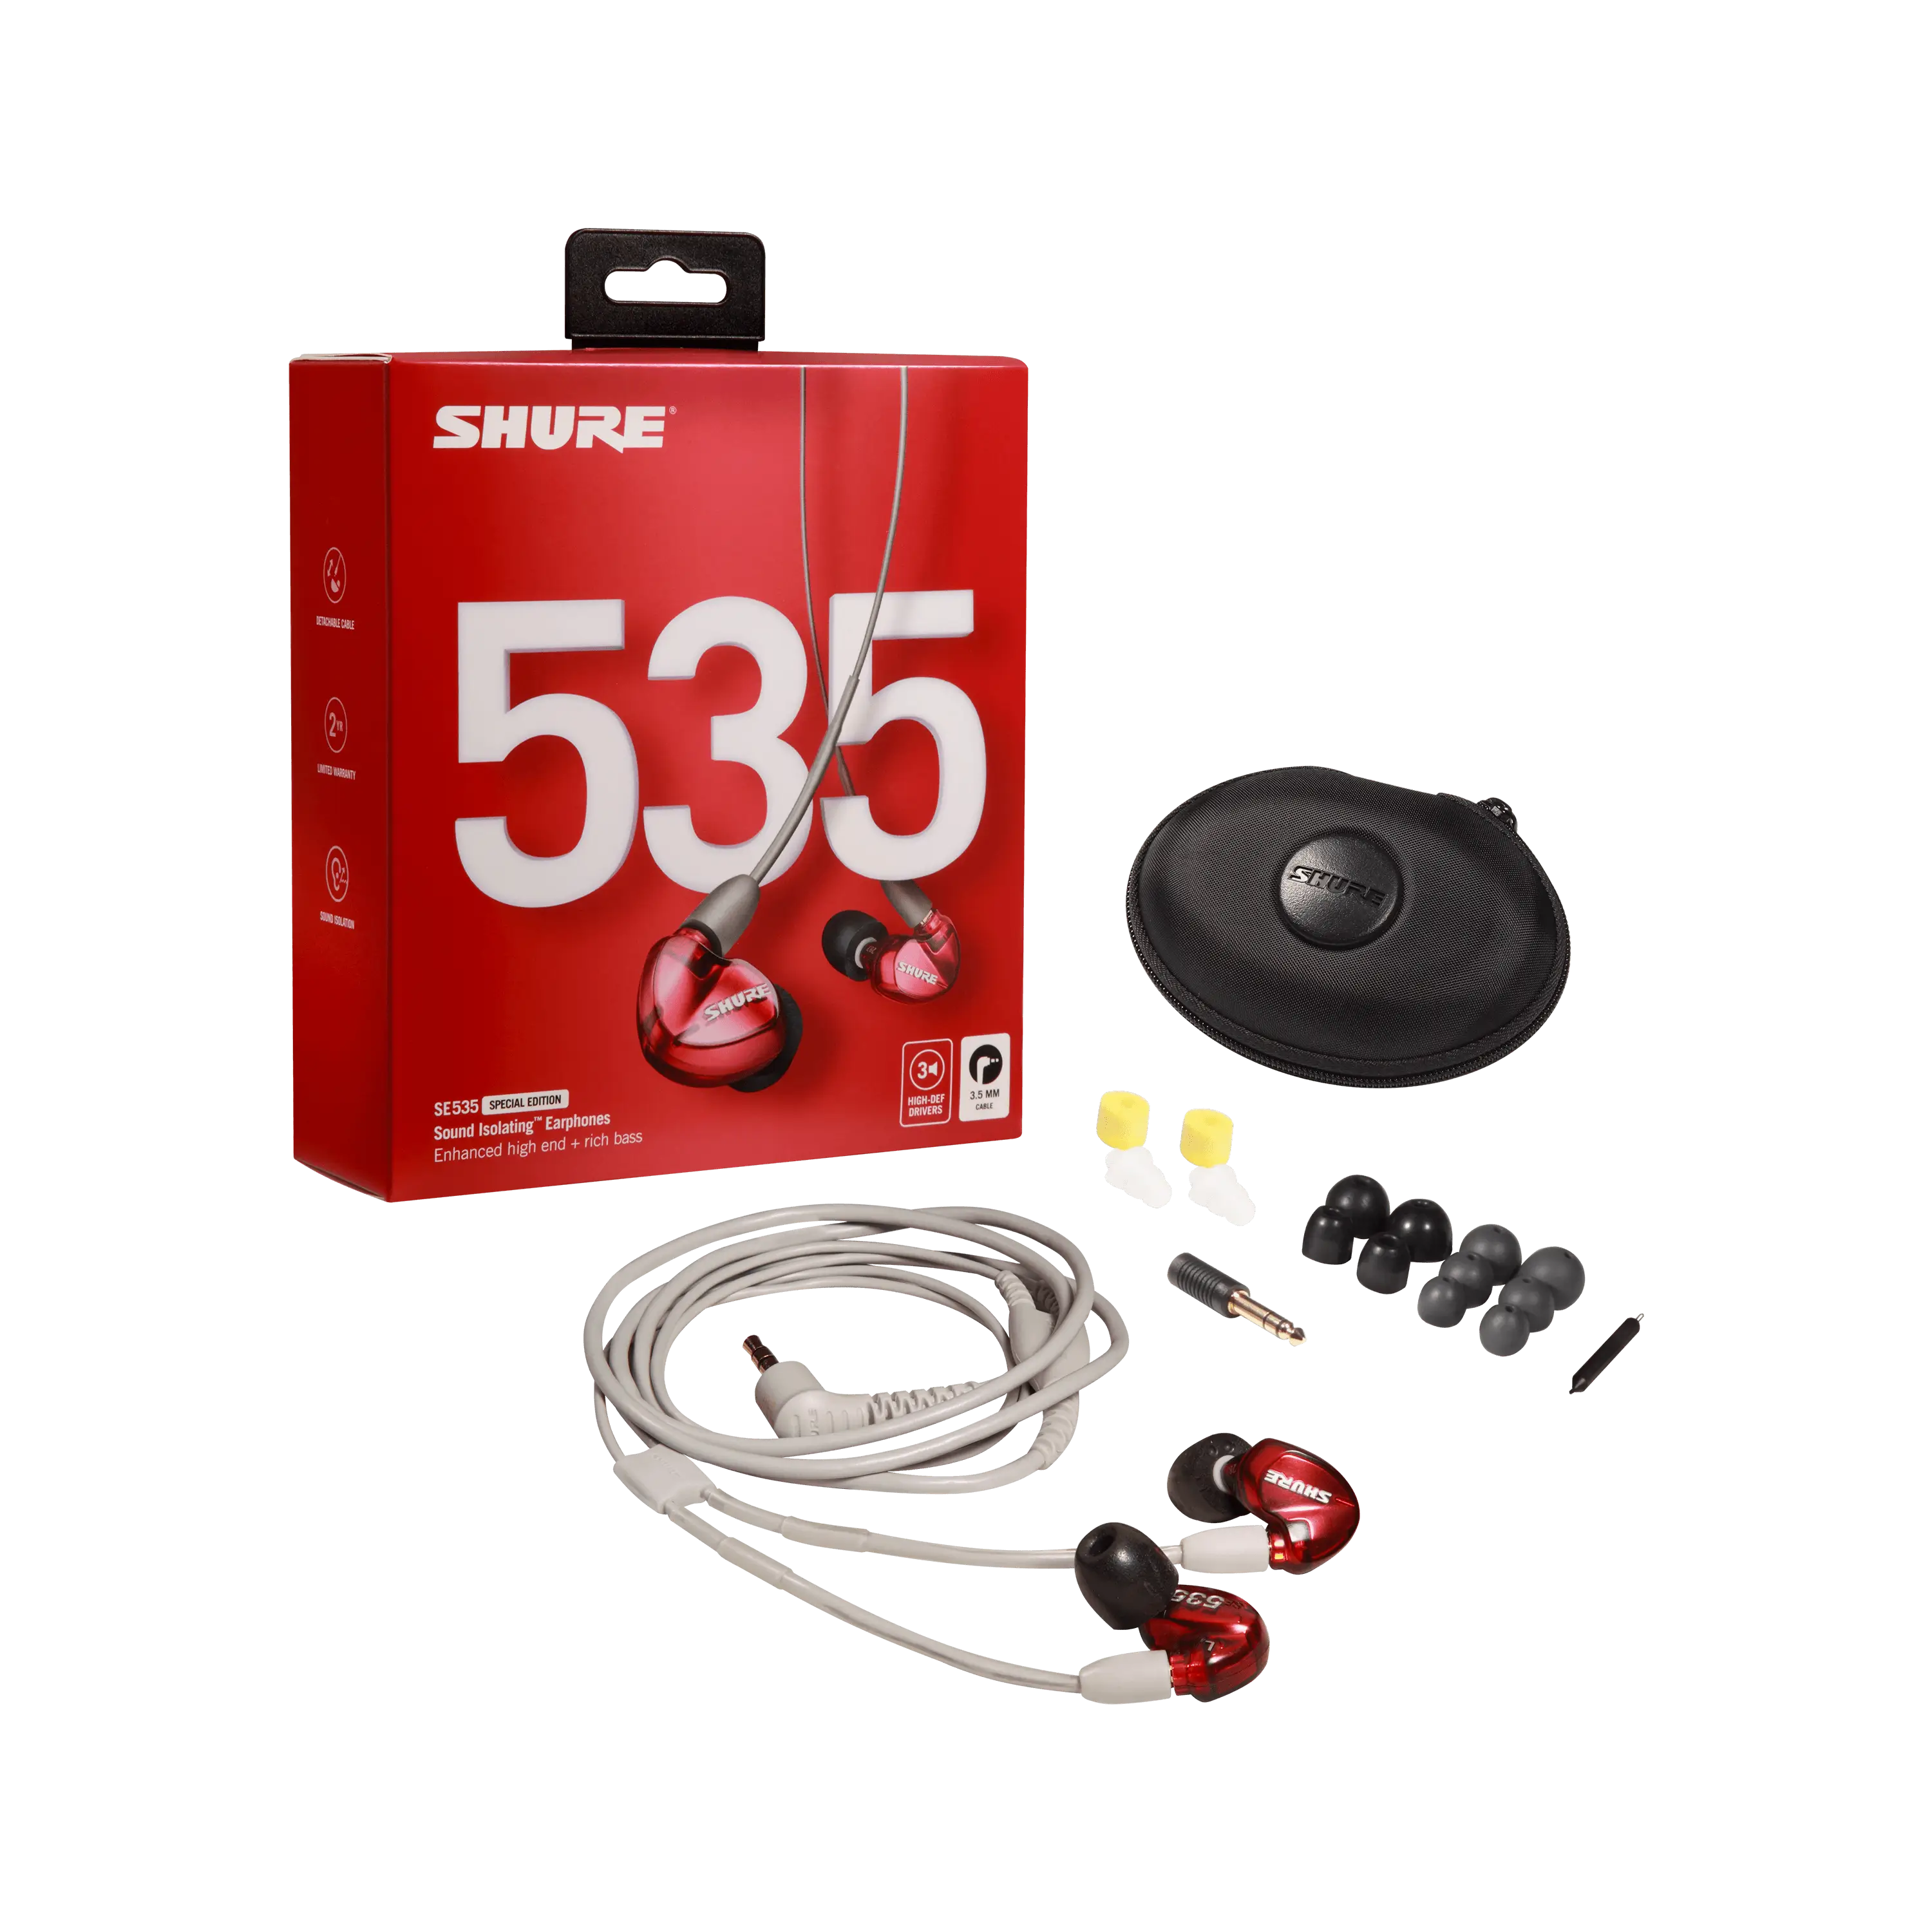 SE535 Limited Edition - Sound Isolating™ Earphones - Shure Middle 